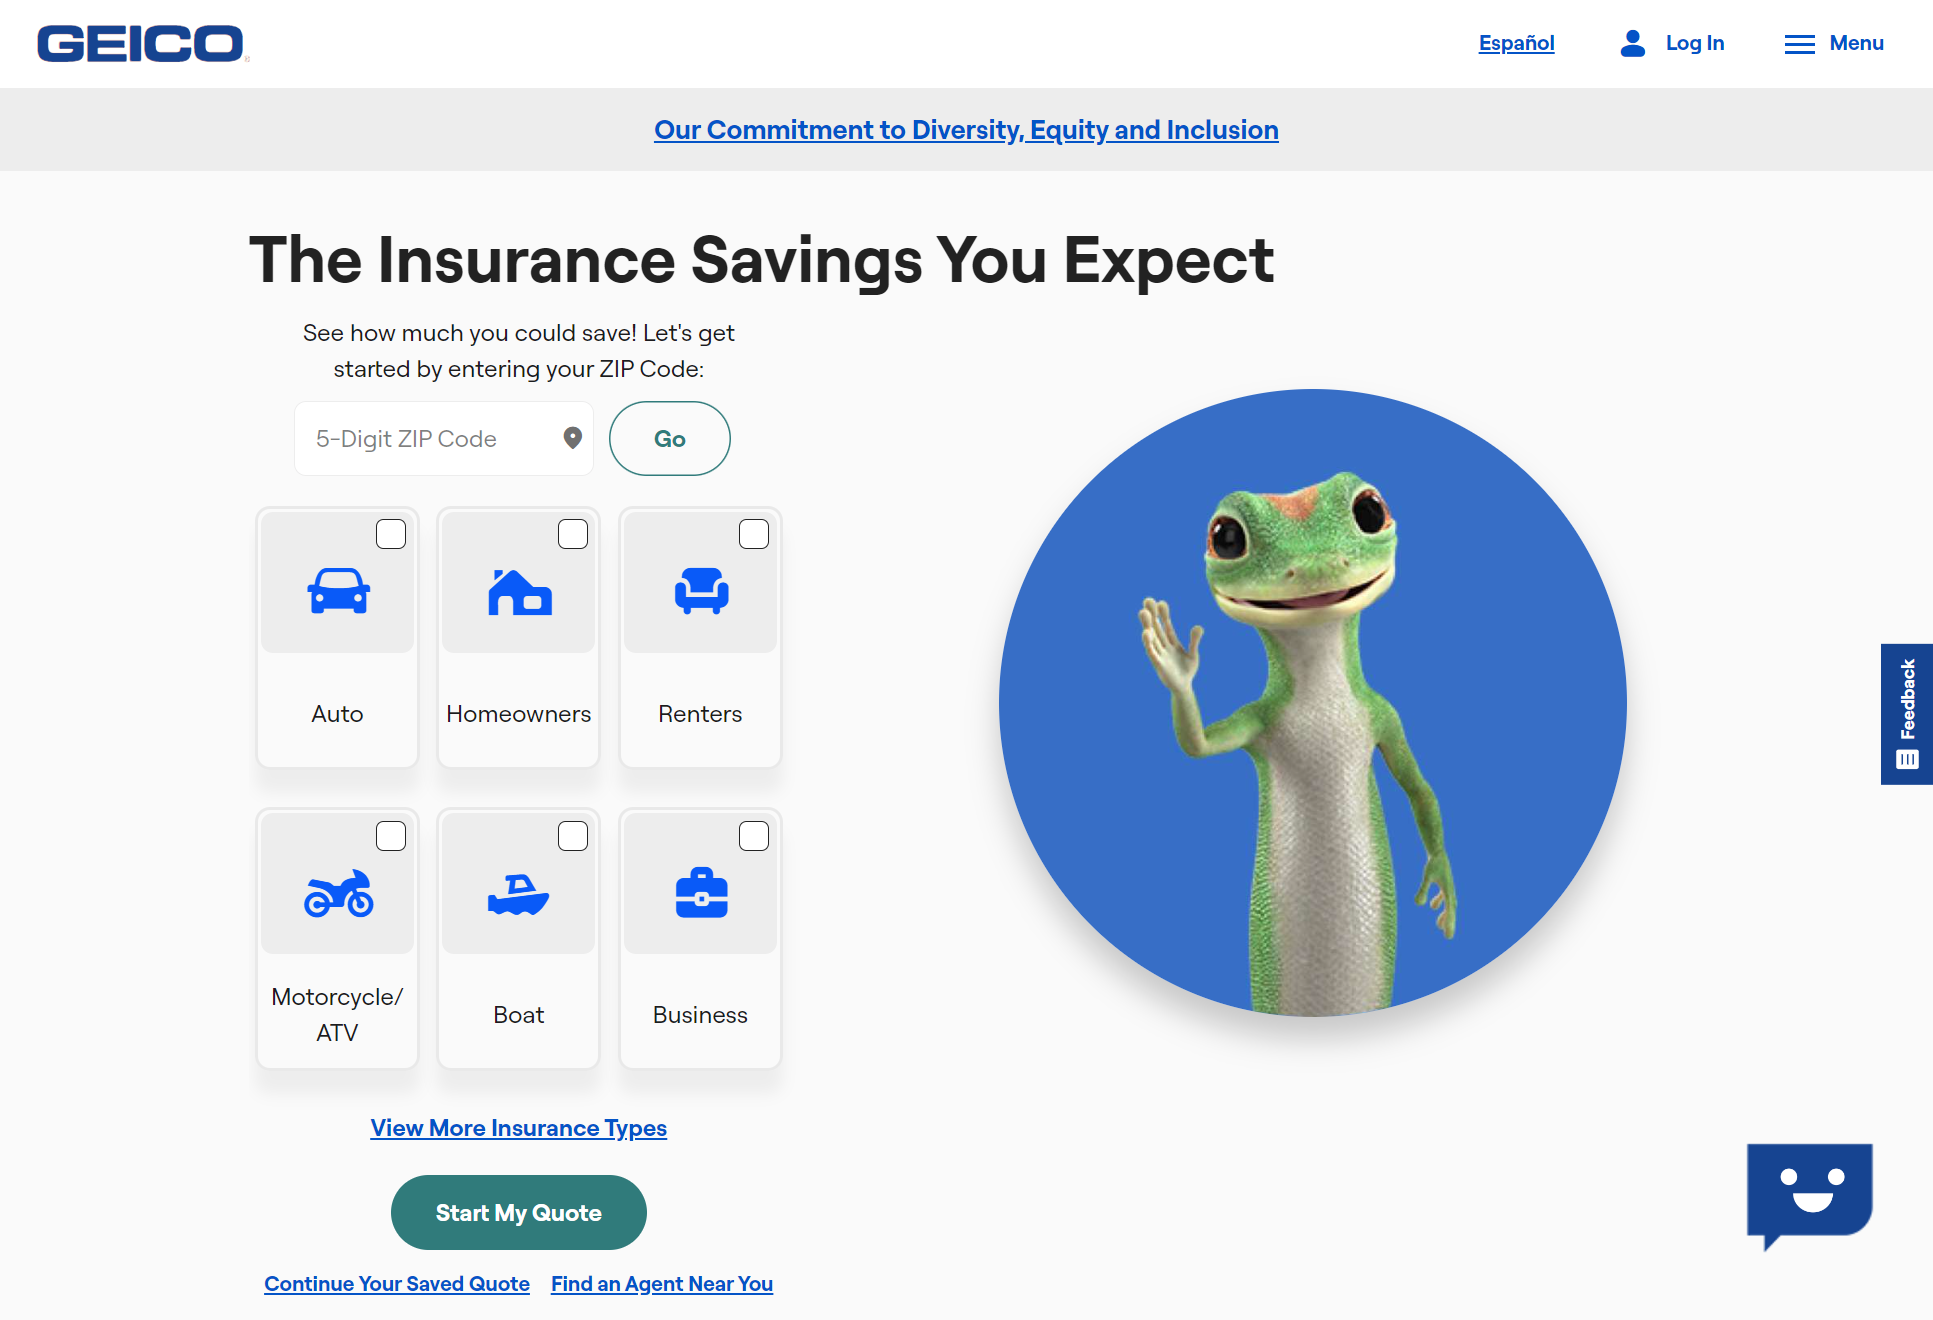 Best Auto Insurance for First Responders: Geico